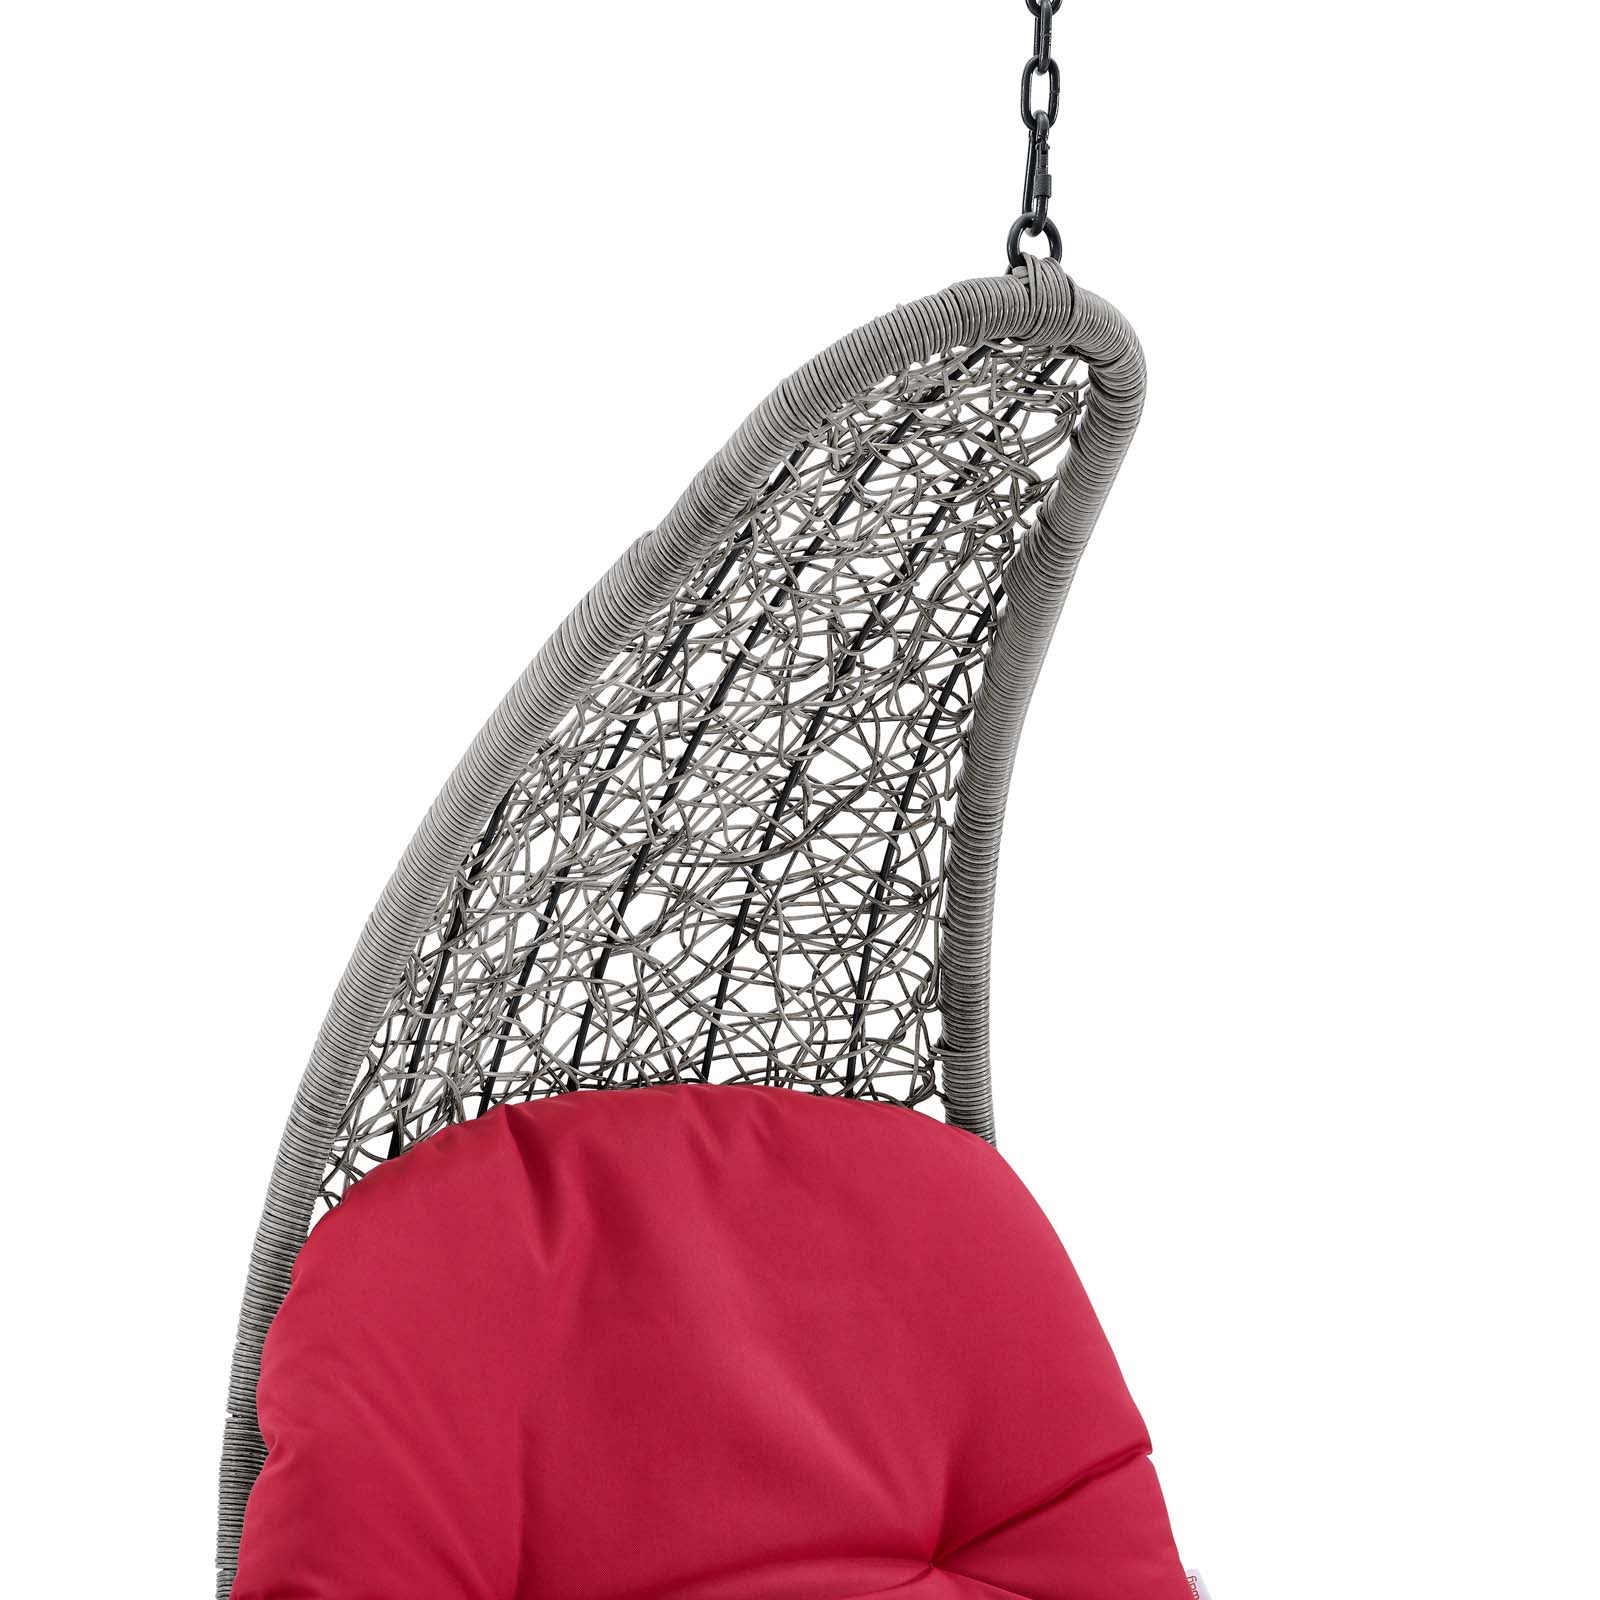 Modway - Landscape Hanging Chaise Lounge Outdoor Patio Swing Chair - EEI-4589